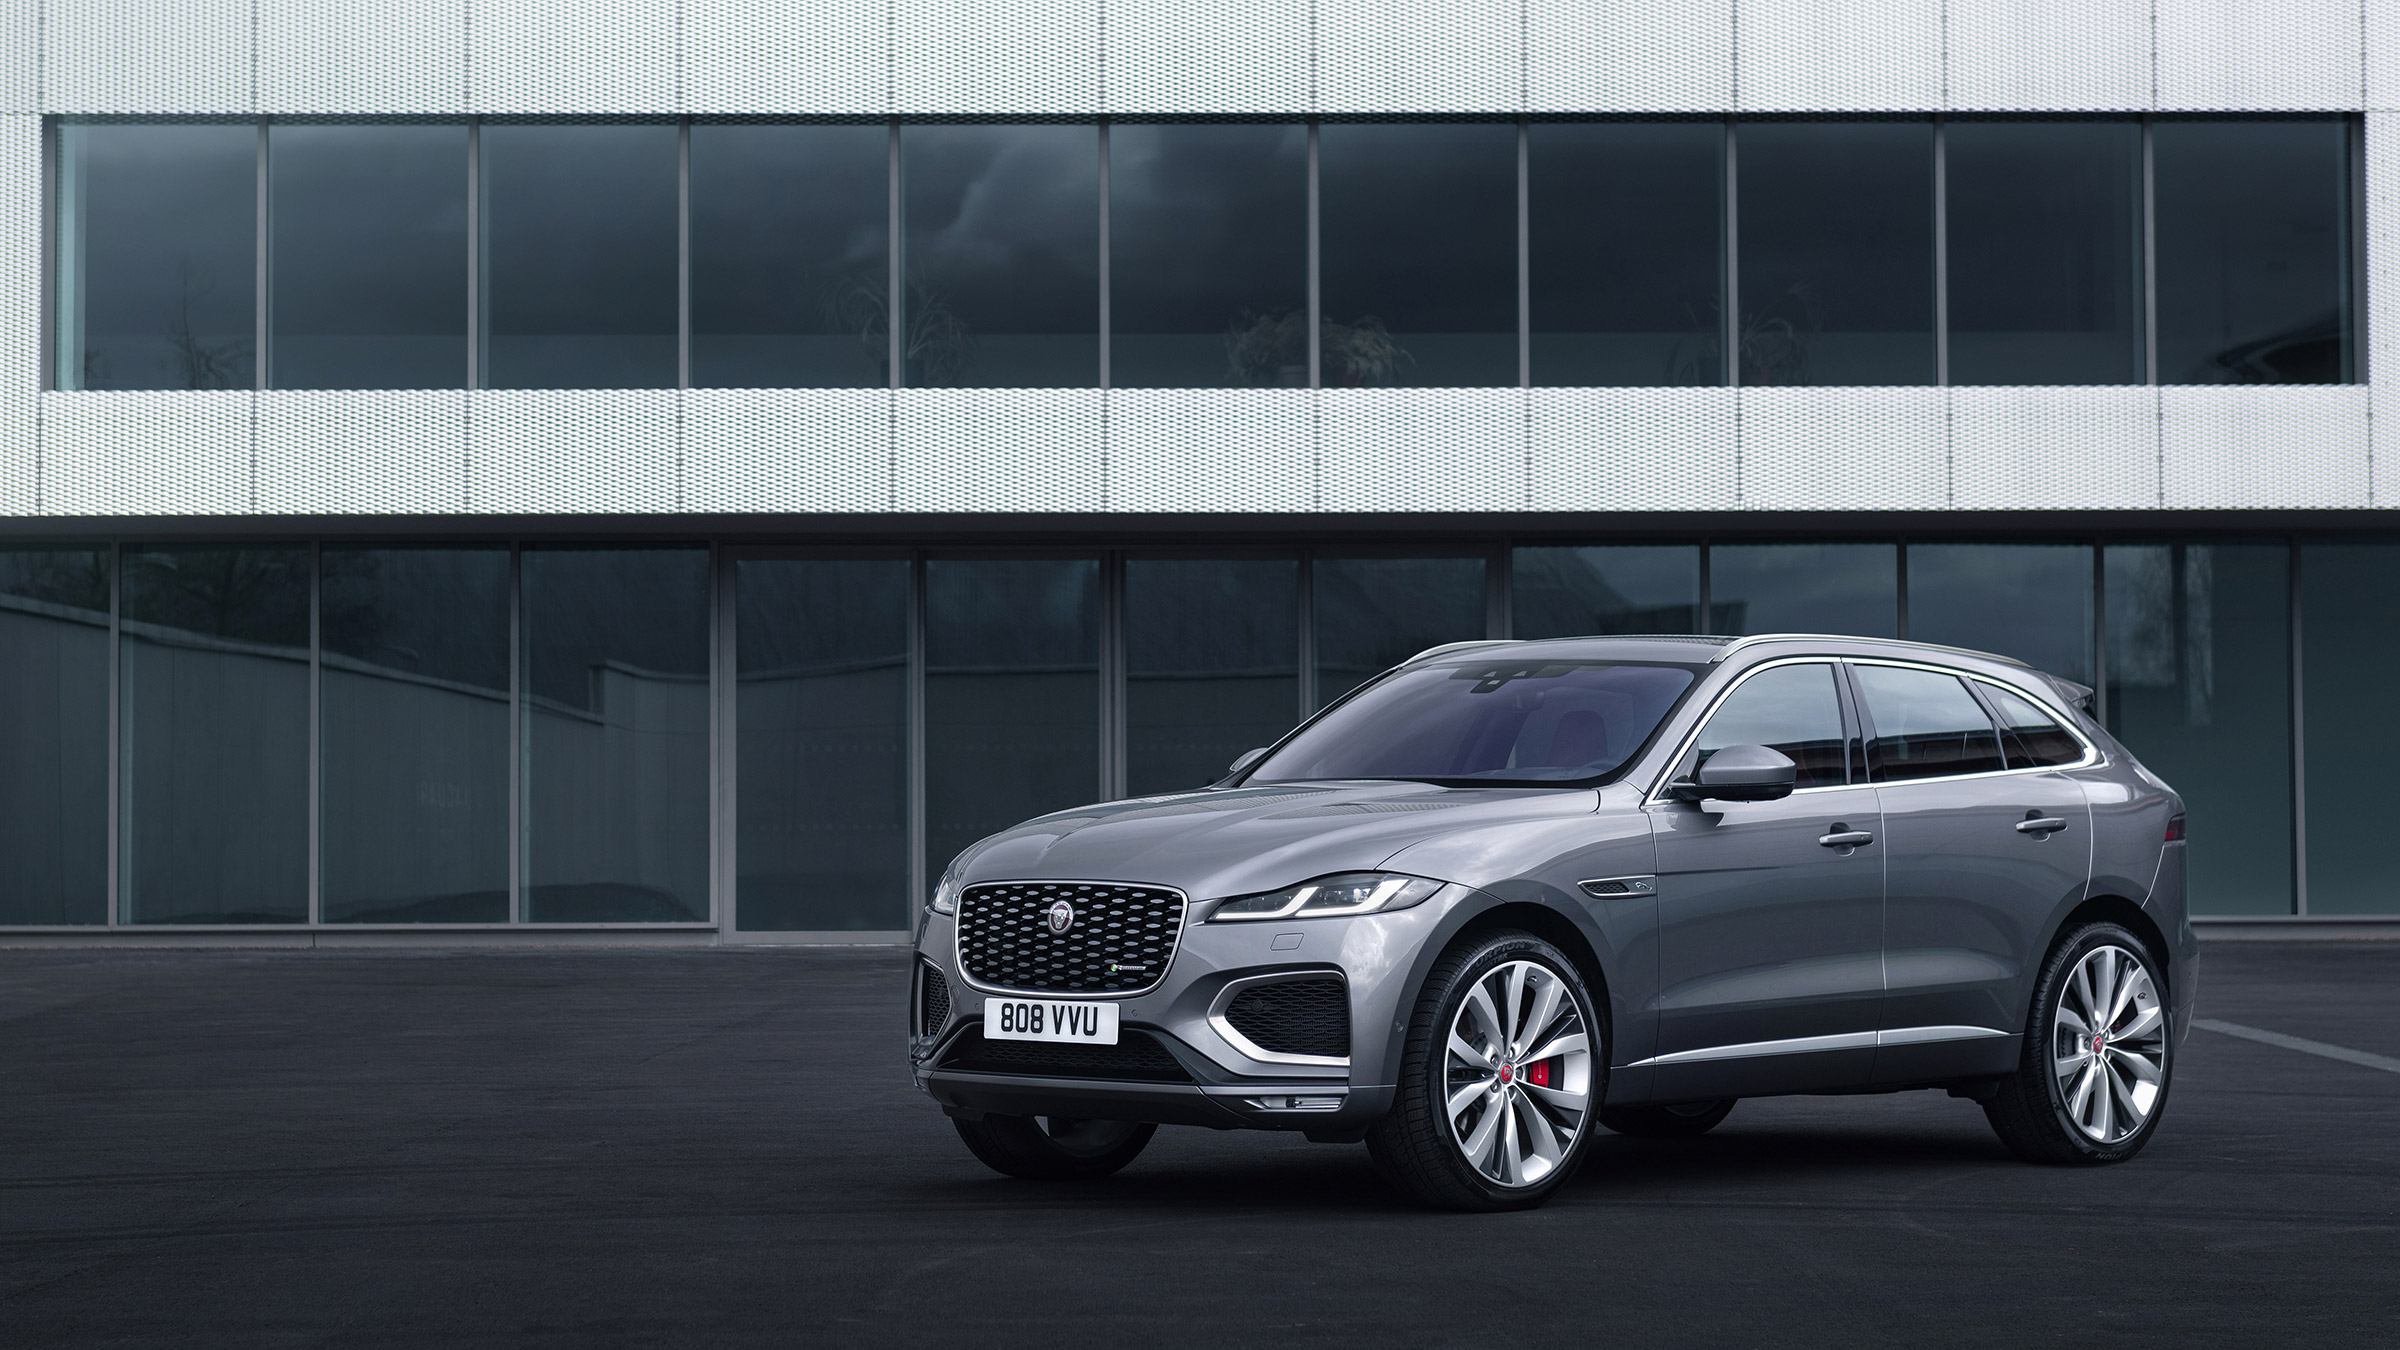 Jaguar F Pace Revealed New Engines Interior And Tech Evo